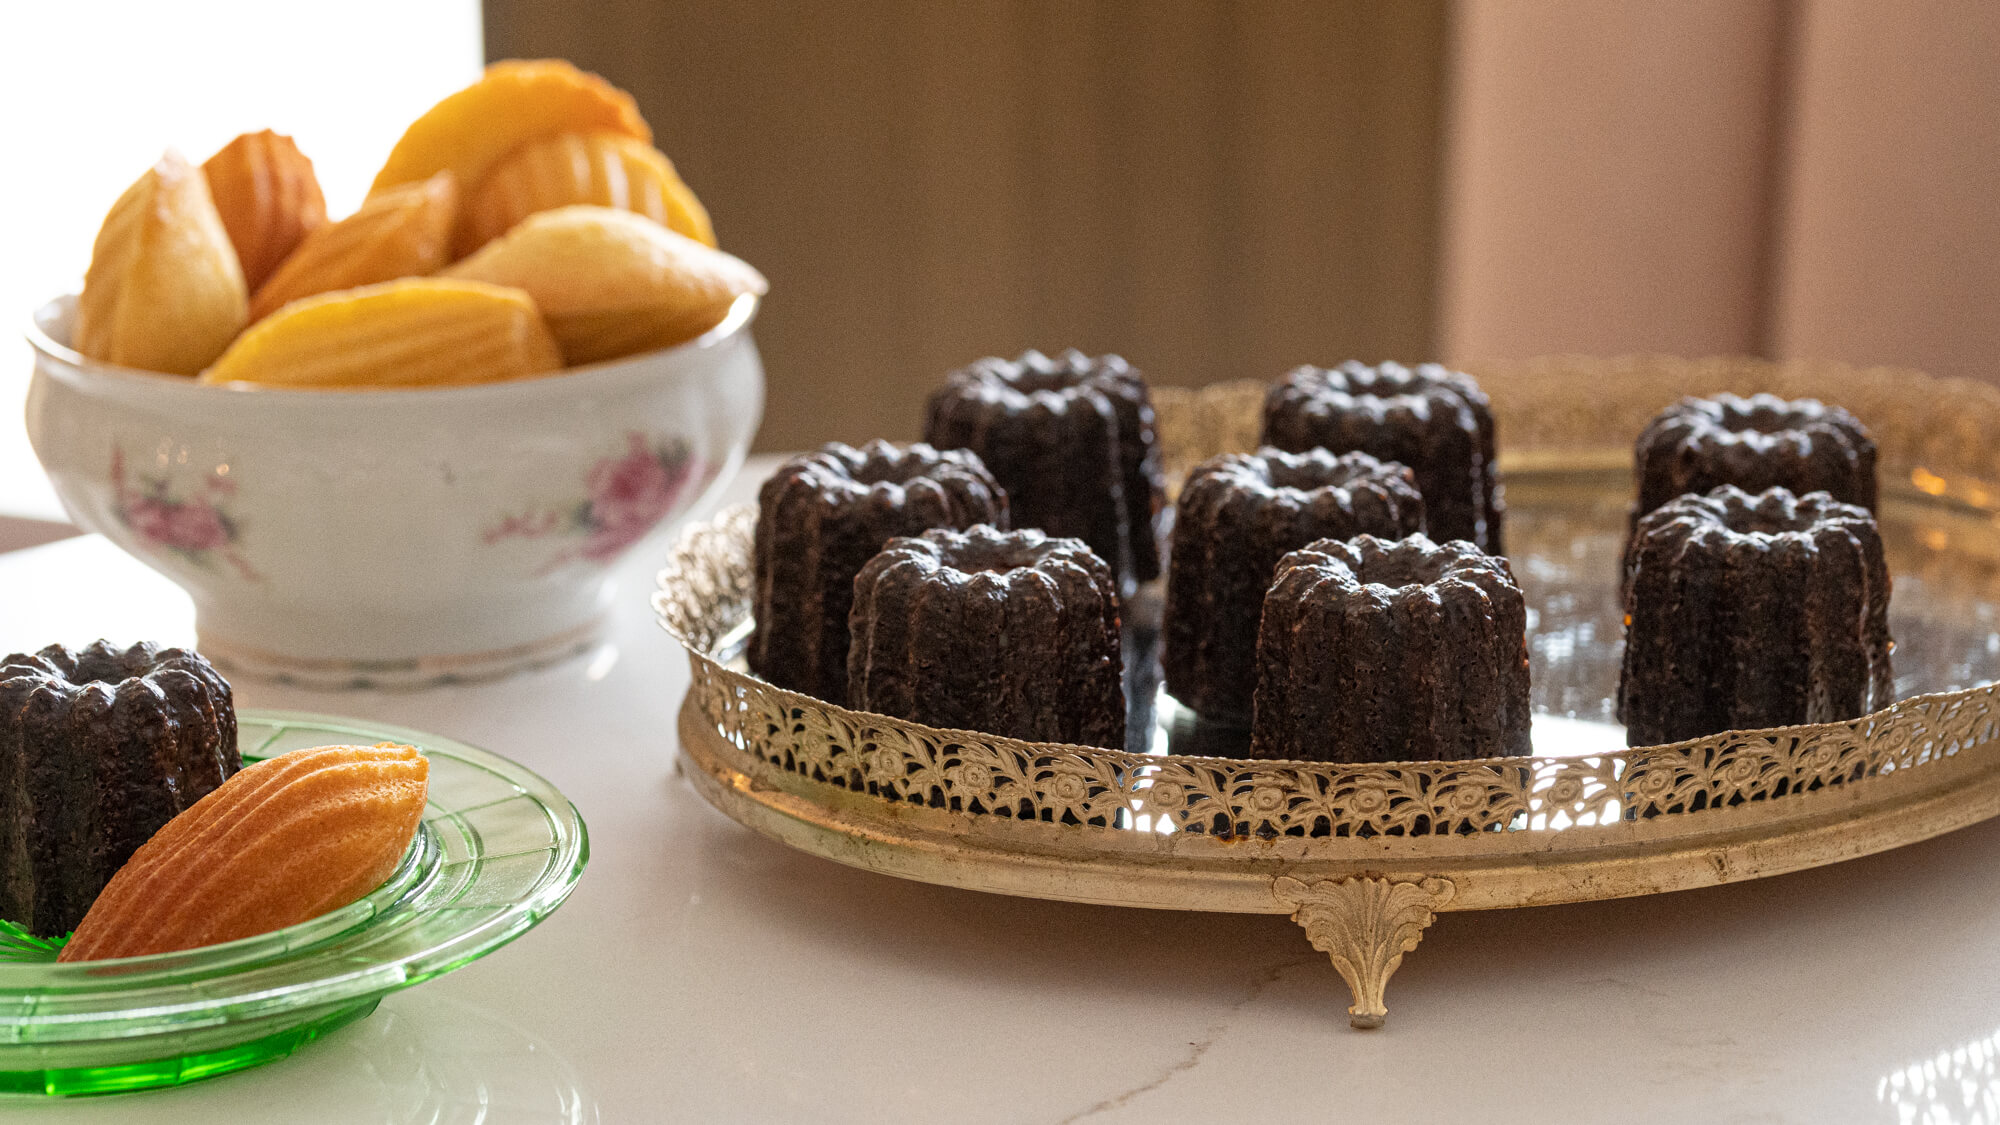 Gold tray of cannelés